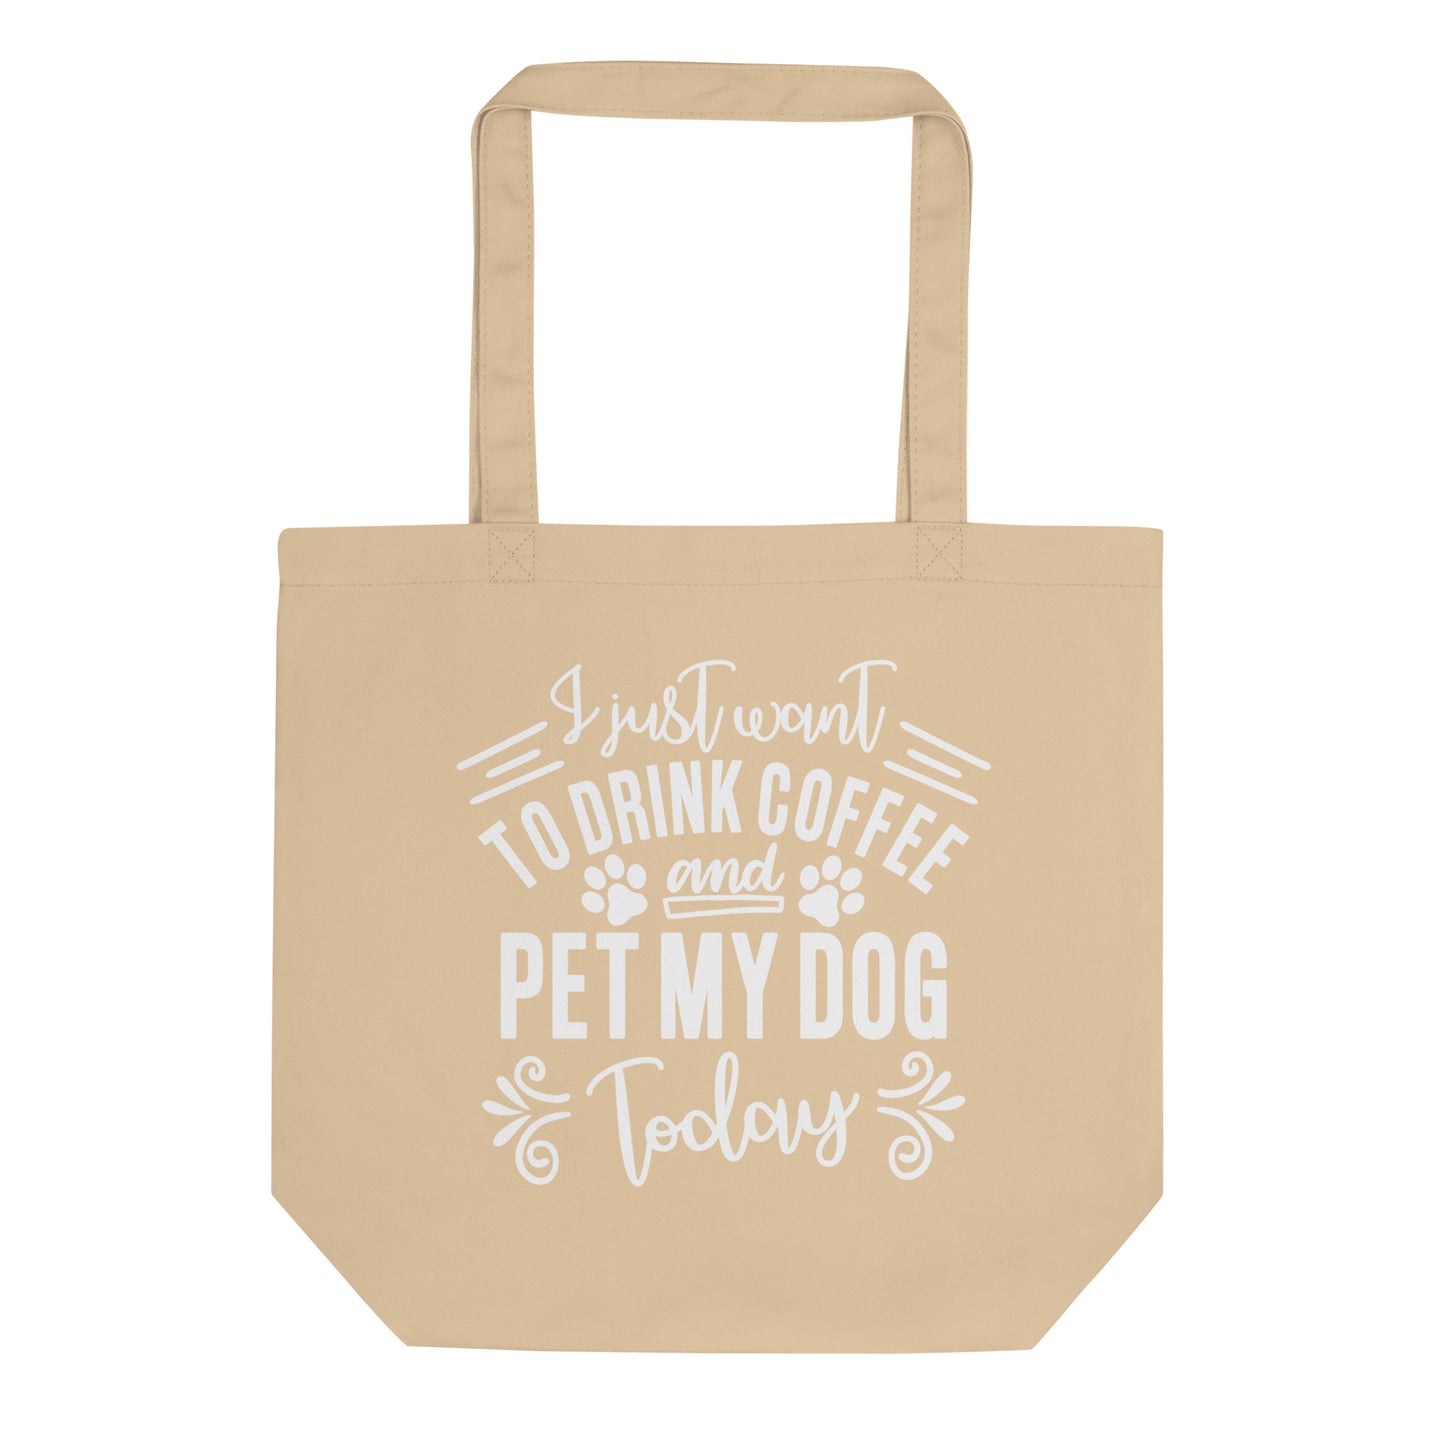 I Just Want to Drink Coffee and Pet My Dog Today Eco Tote Bag